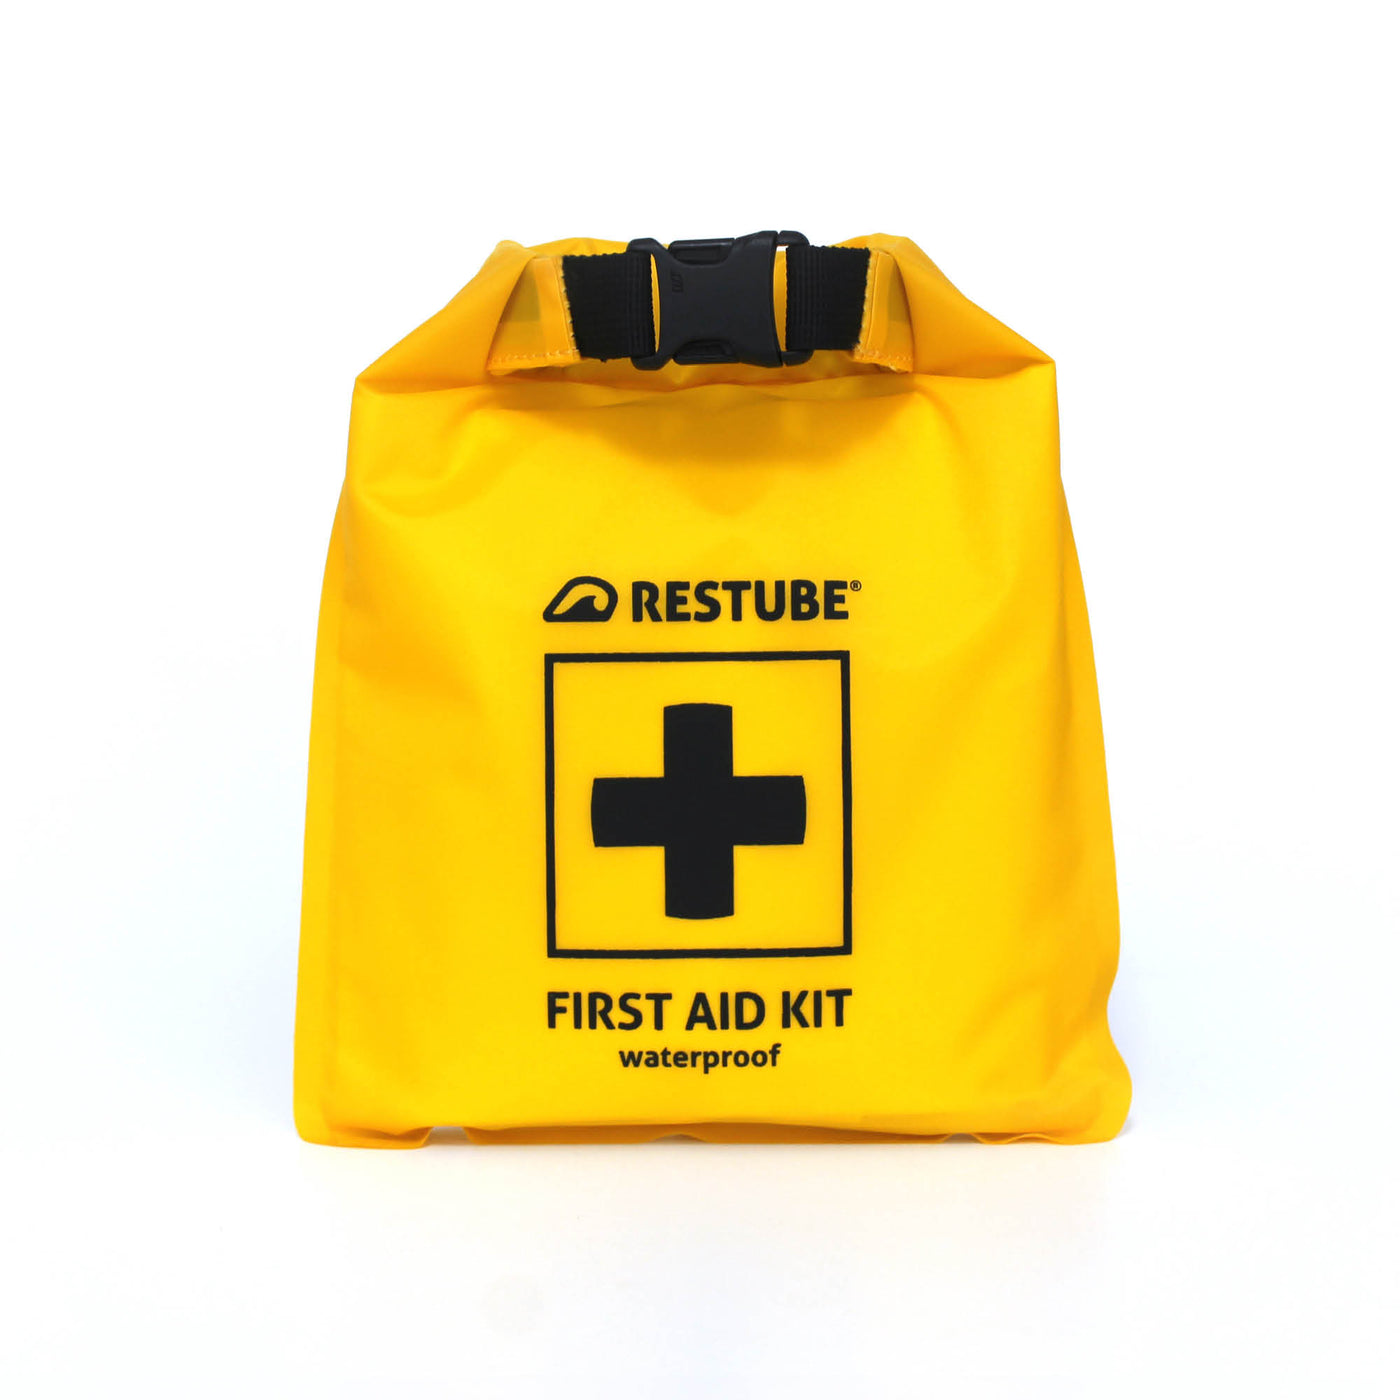 First aid kit by RESTUBE